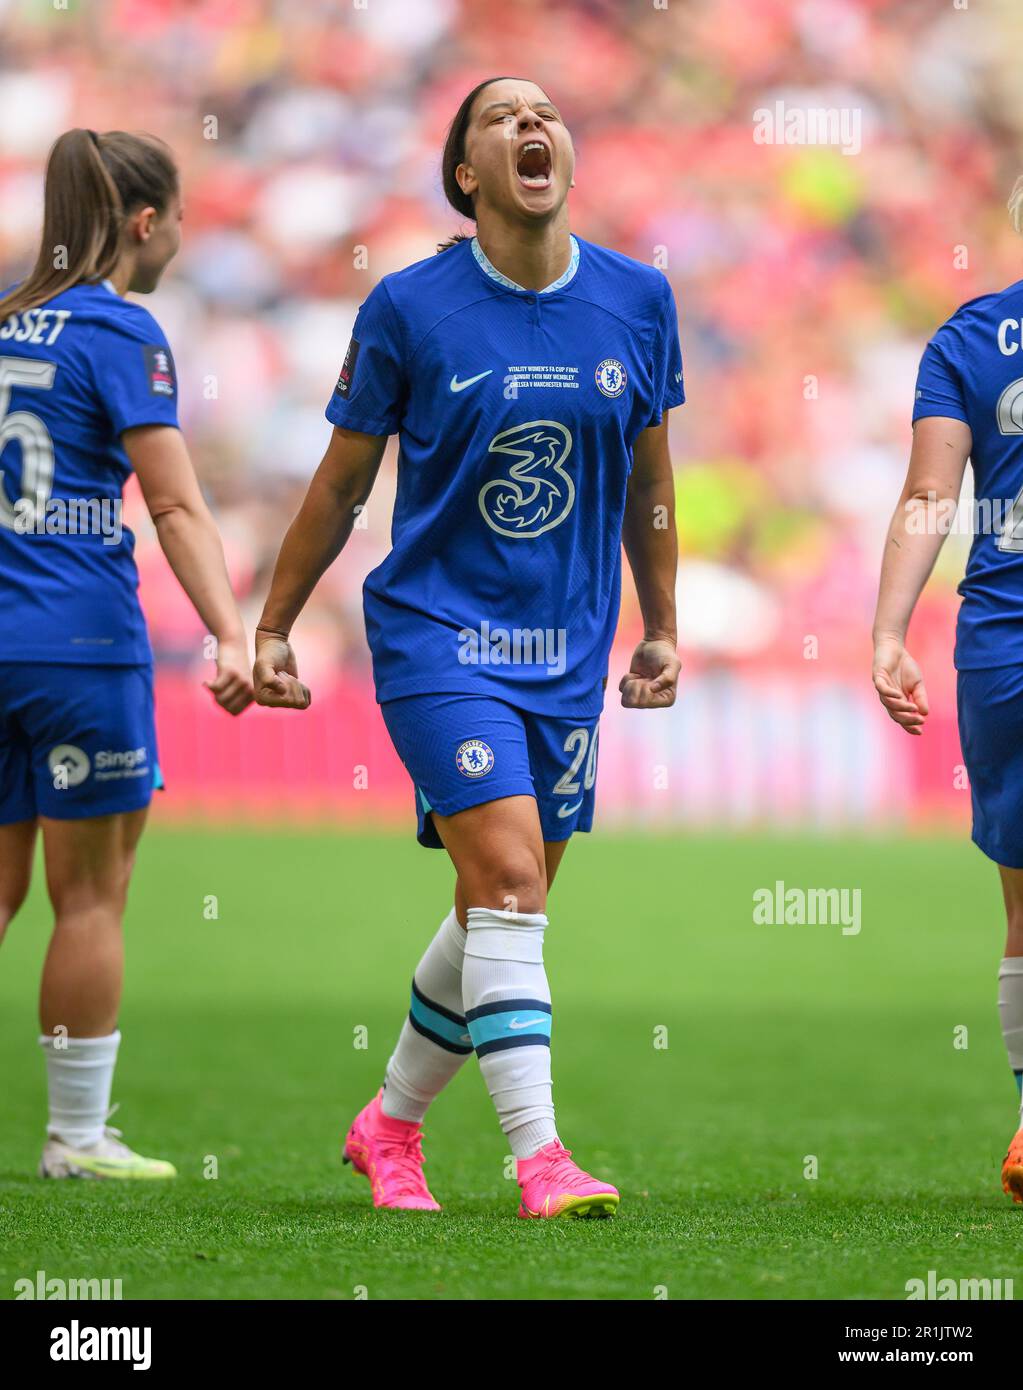 London, UK. 14th May, 2023. 14 May 2023 - Chelsea v Manchester United - Vitality Women's FA Cup - Final - Wembley Stadium Chelsea's Sam Kerr during the Vitality Women's FA Cup final match at Wembley Stadium, London. Picture Credit: Mark Pain/Alamy Live News Stock Photo